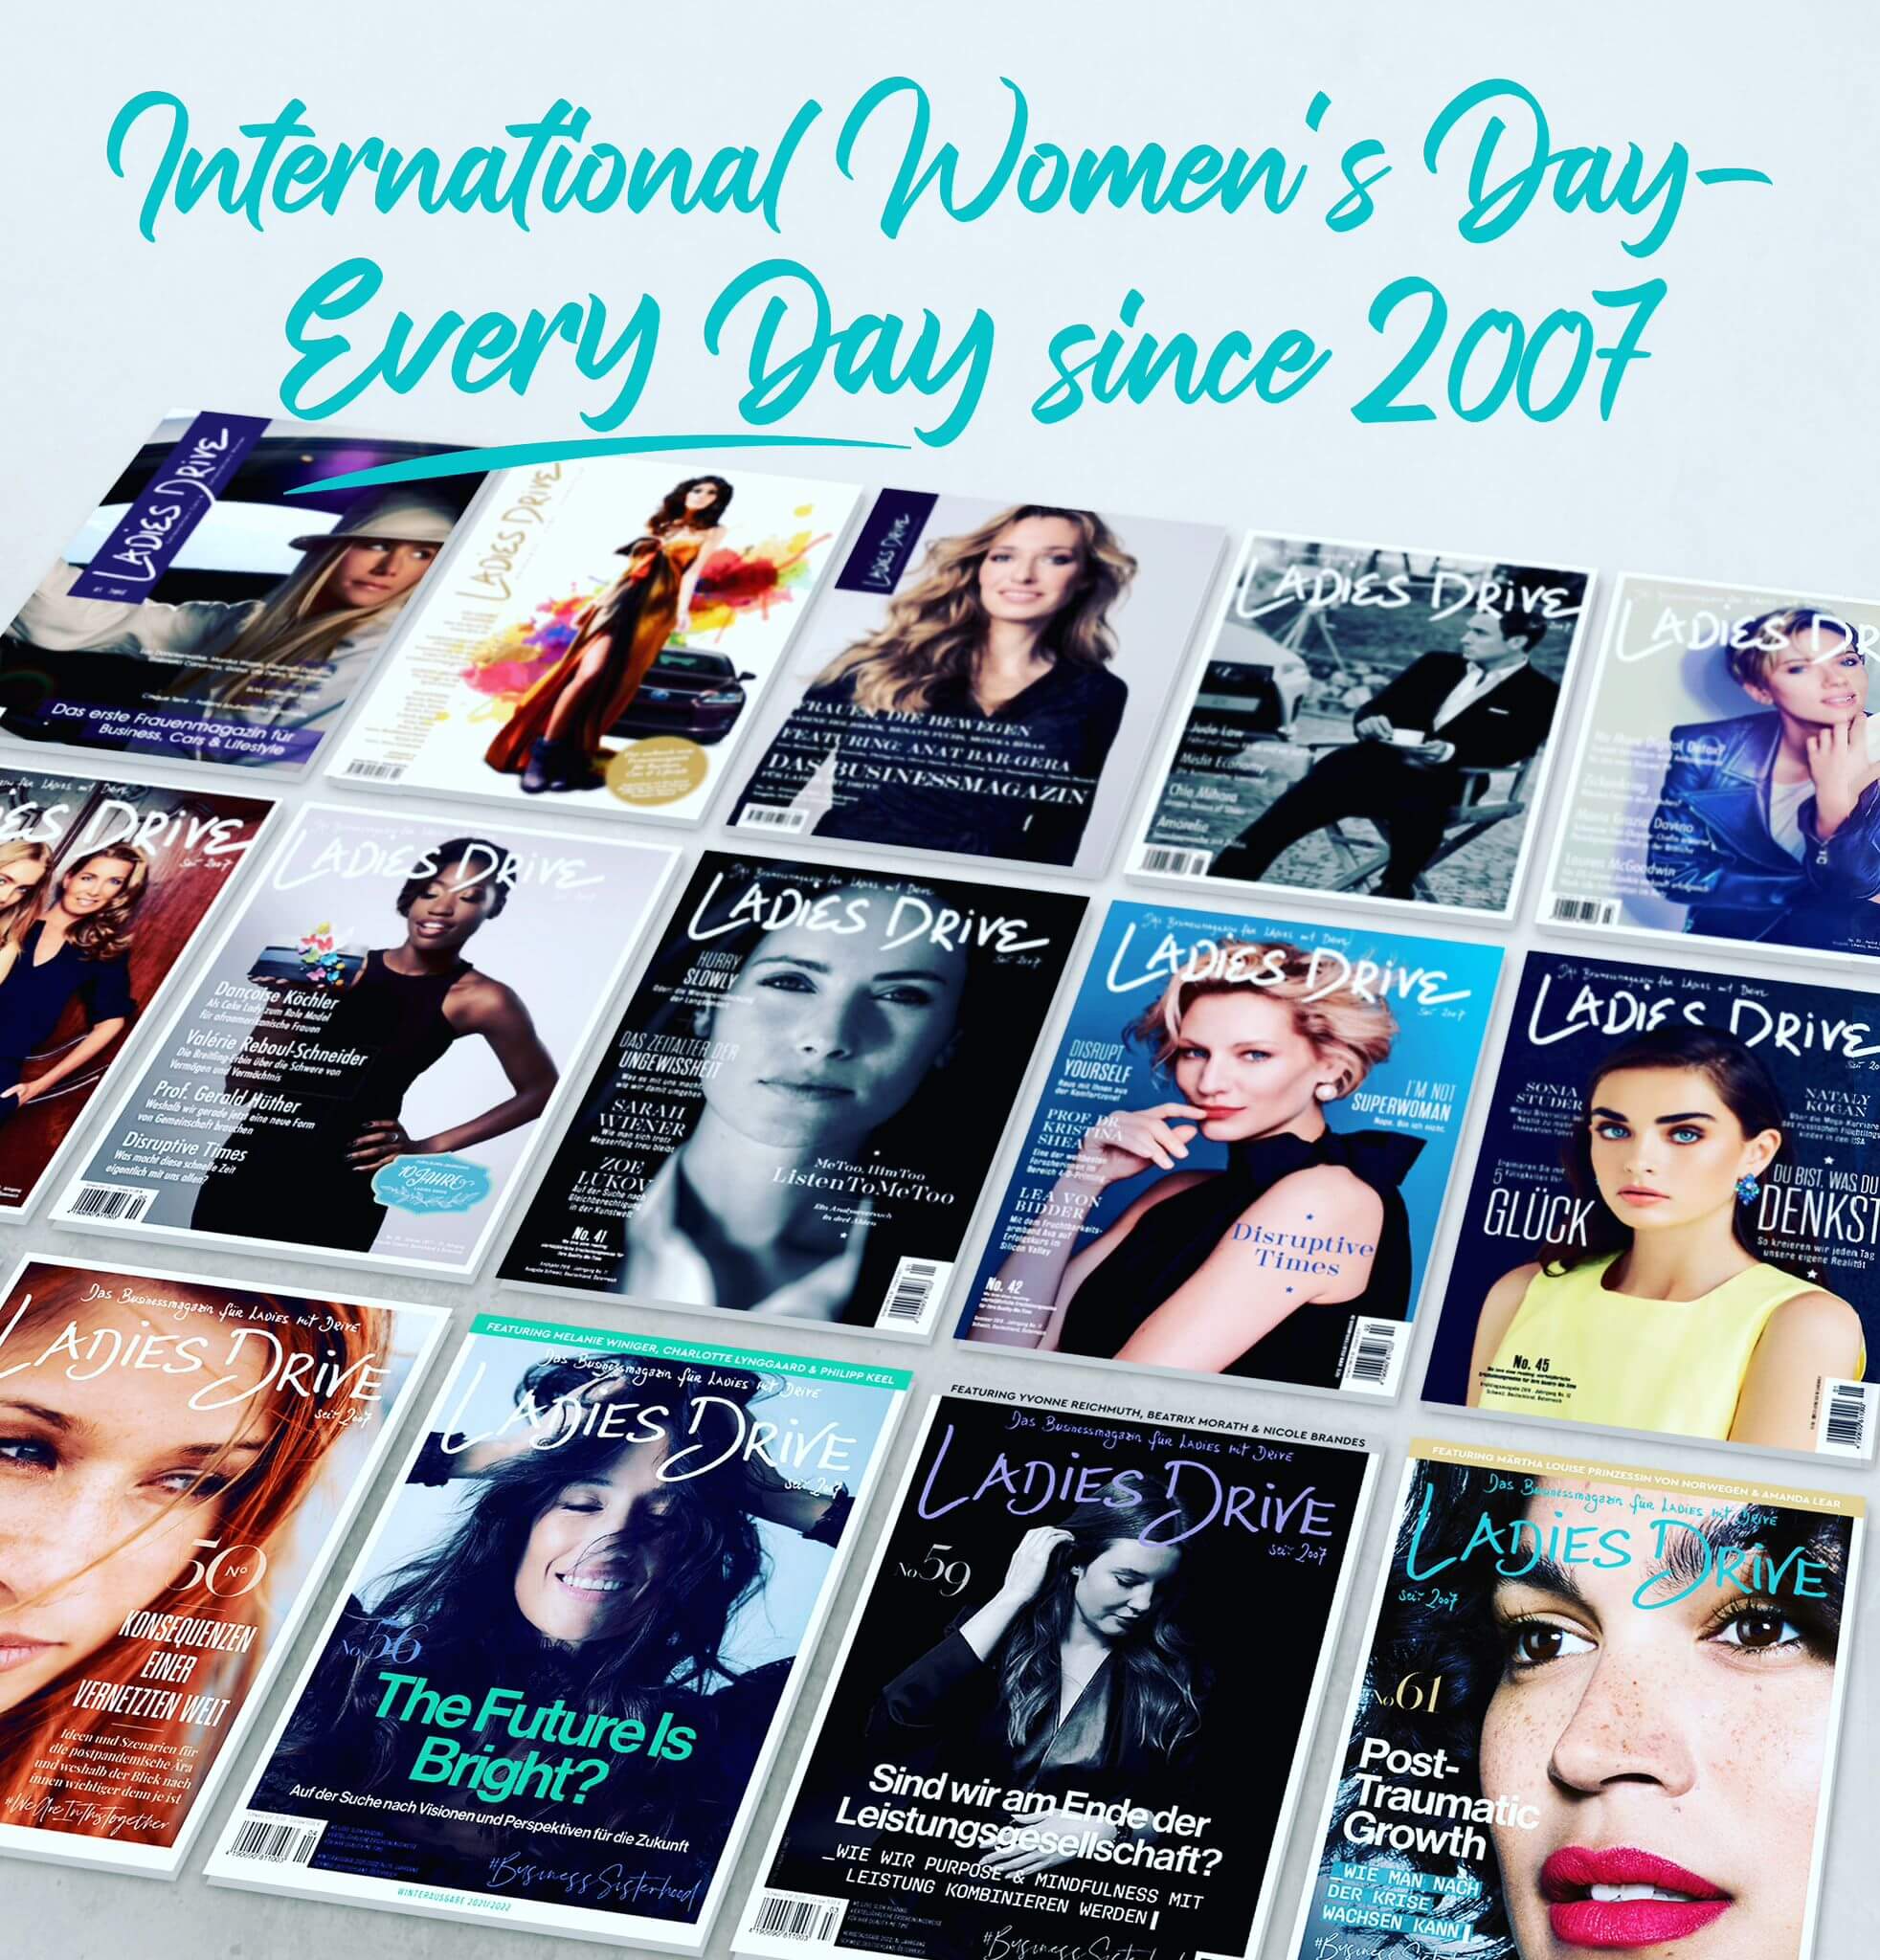 Ladies Drive - International Women's Day - Every day since 2007